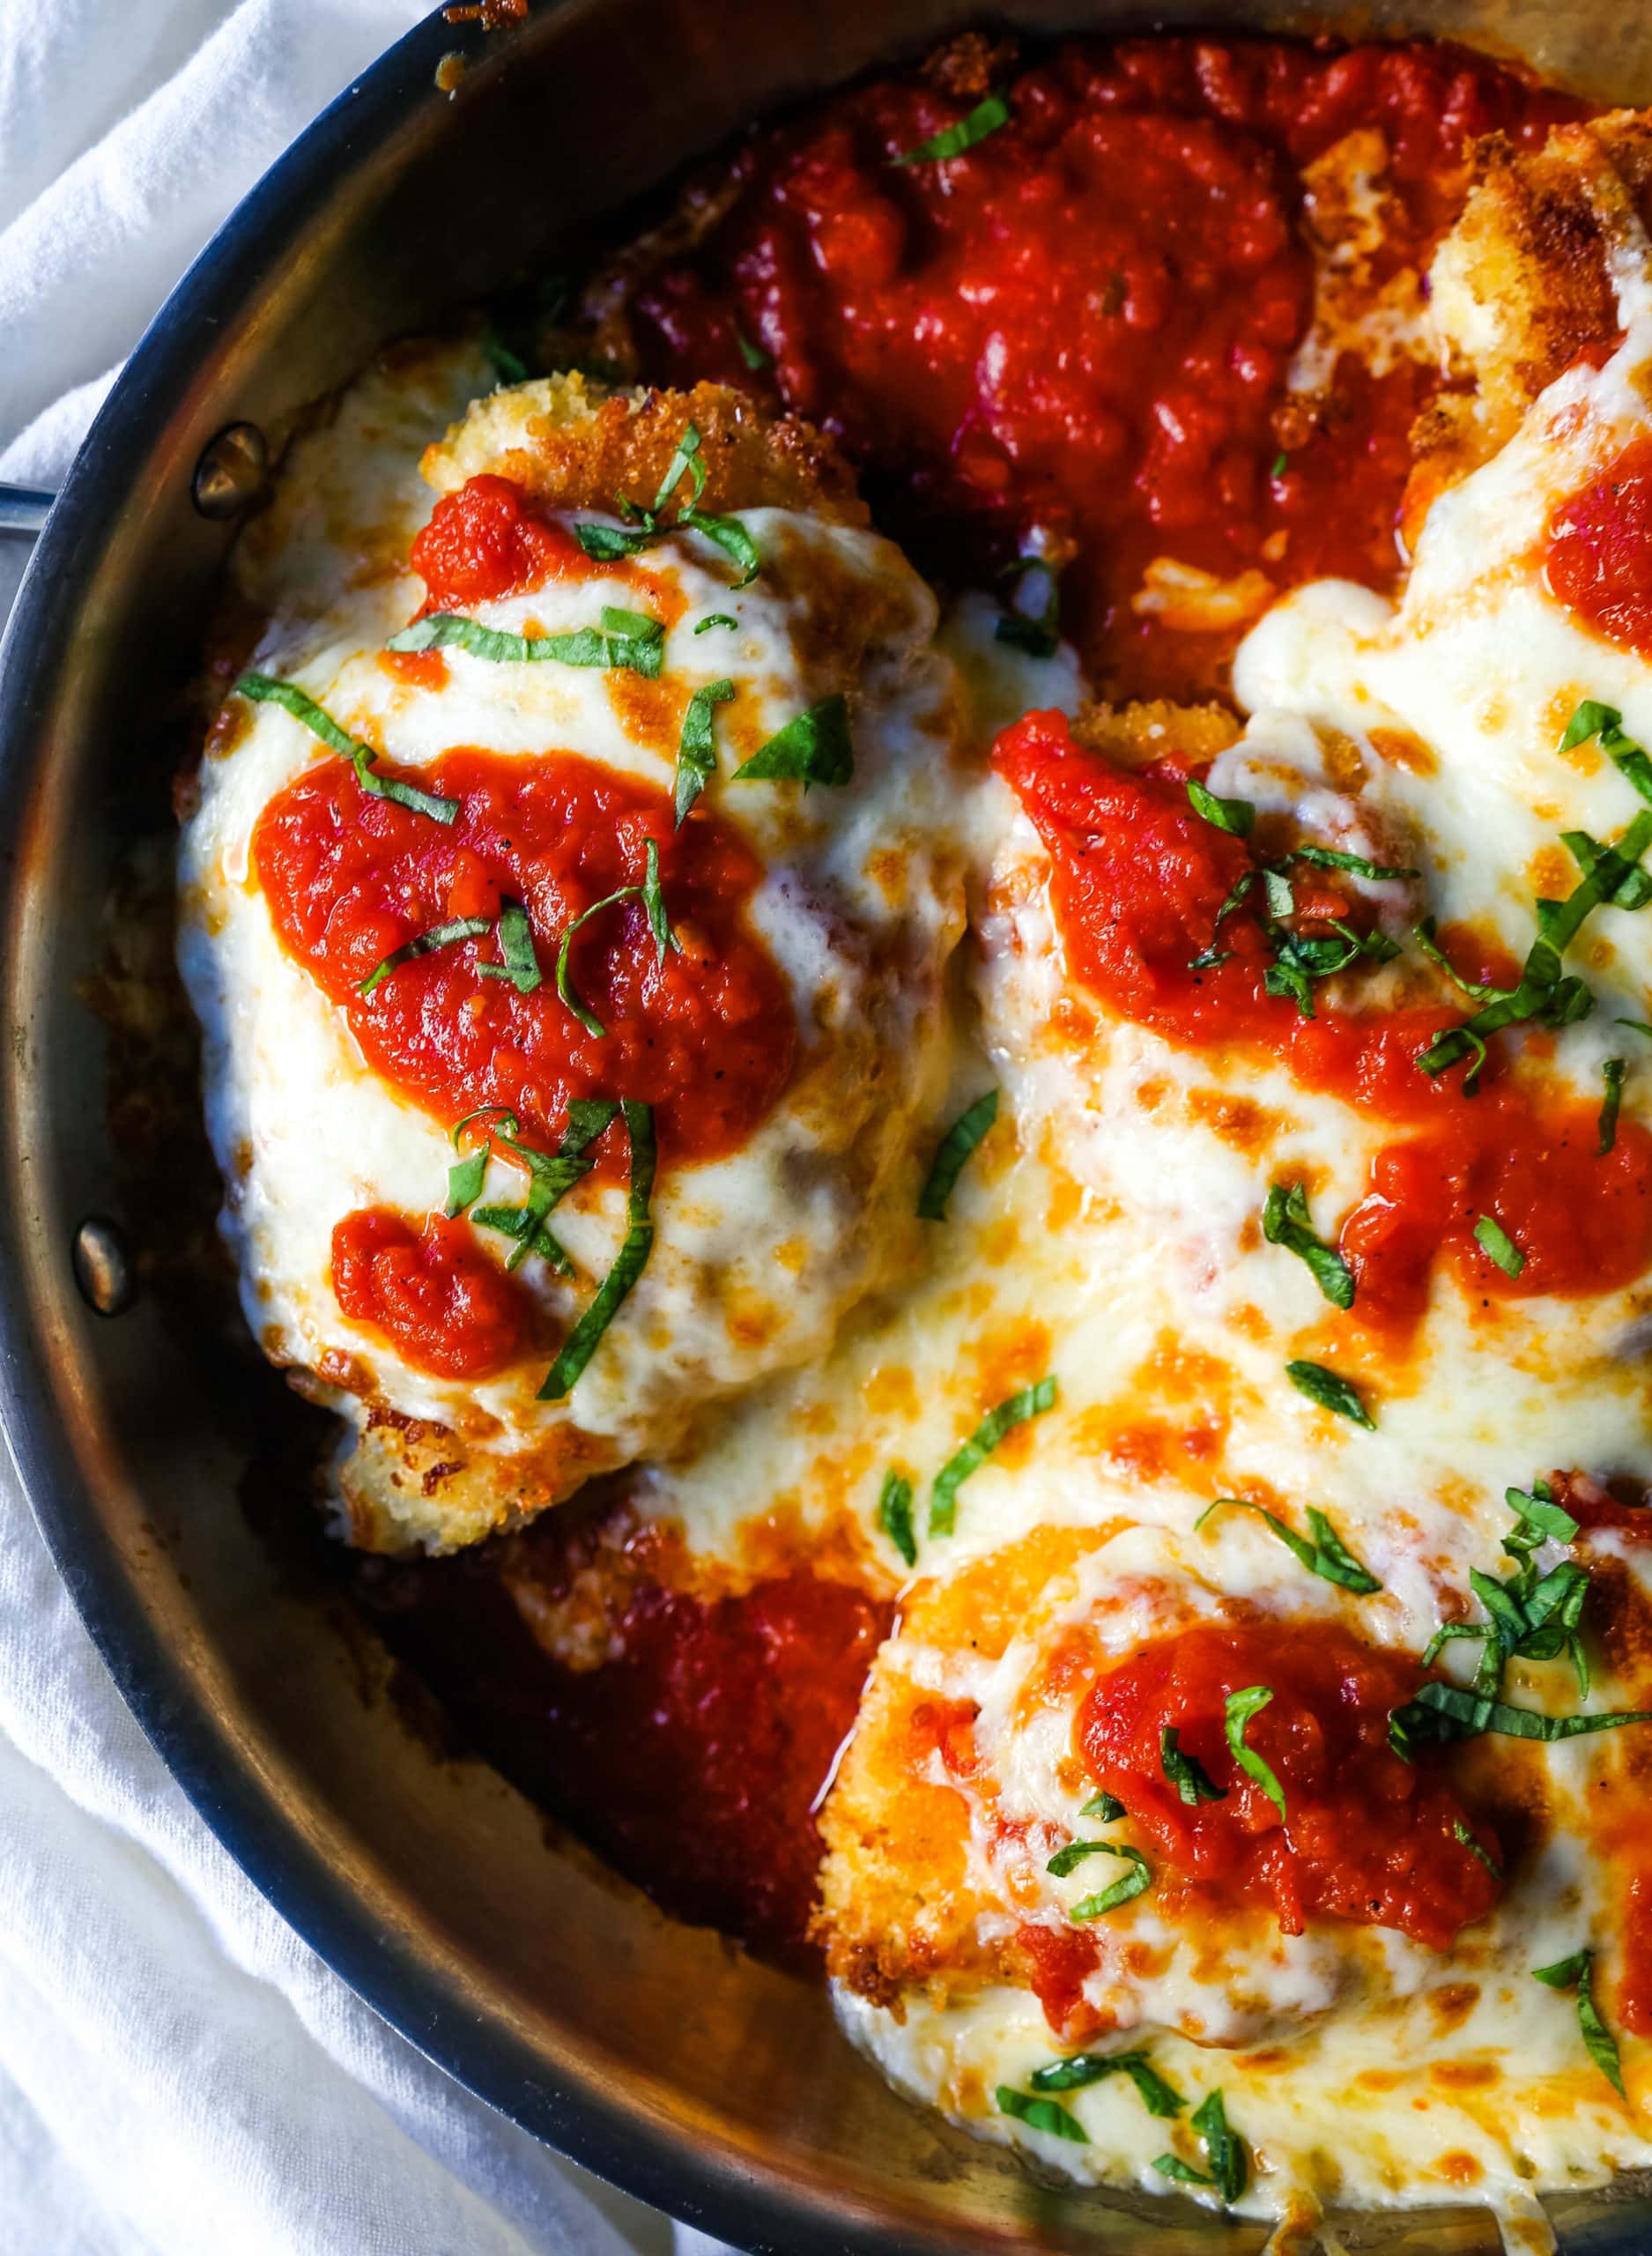 Chicken Parmesan. Panko-crusted chicken breast topped with homemade marinara sauce, melted whole milk mozzarella, and parmesan cheeses and baked until golden and bubbly. www.modernhoney.com #chicken #chickenparmesan #italian